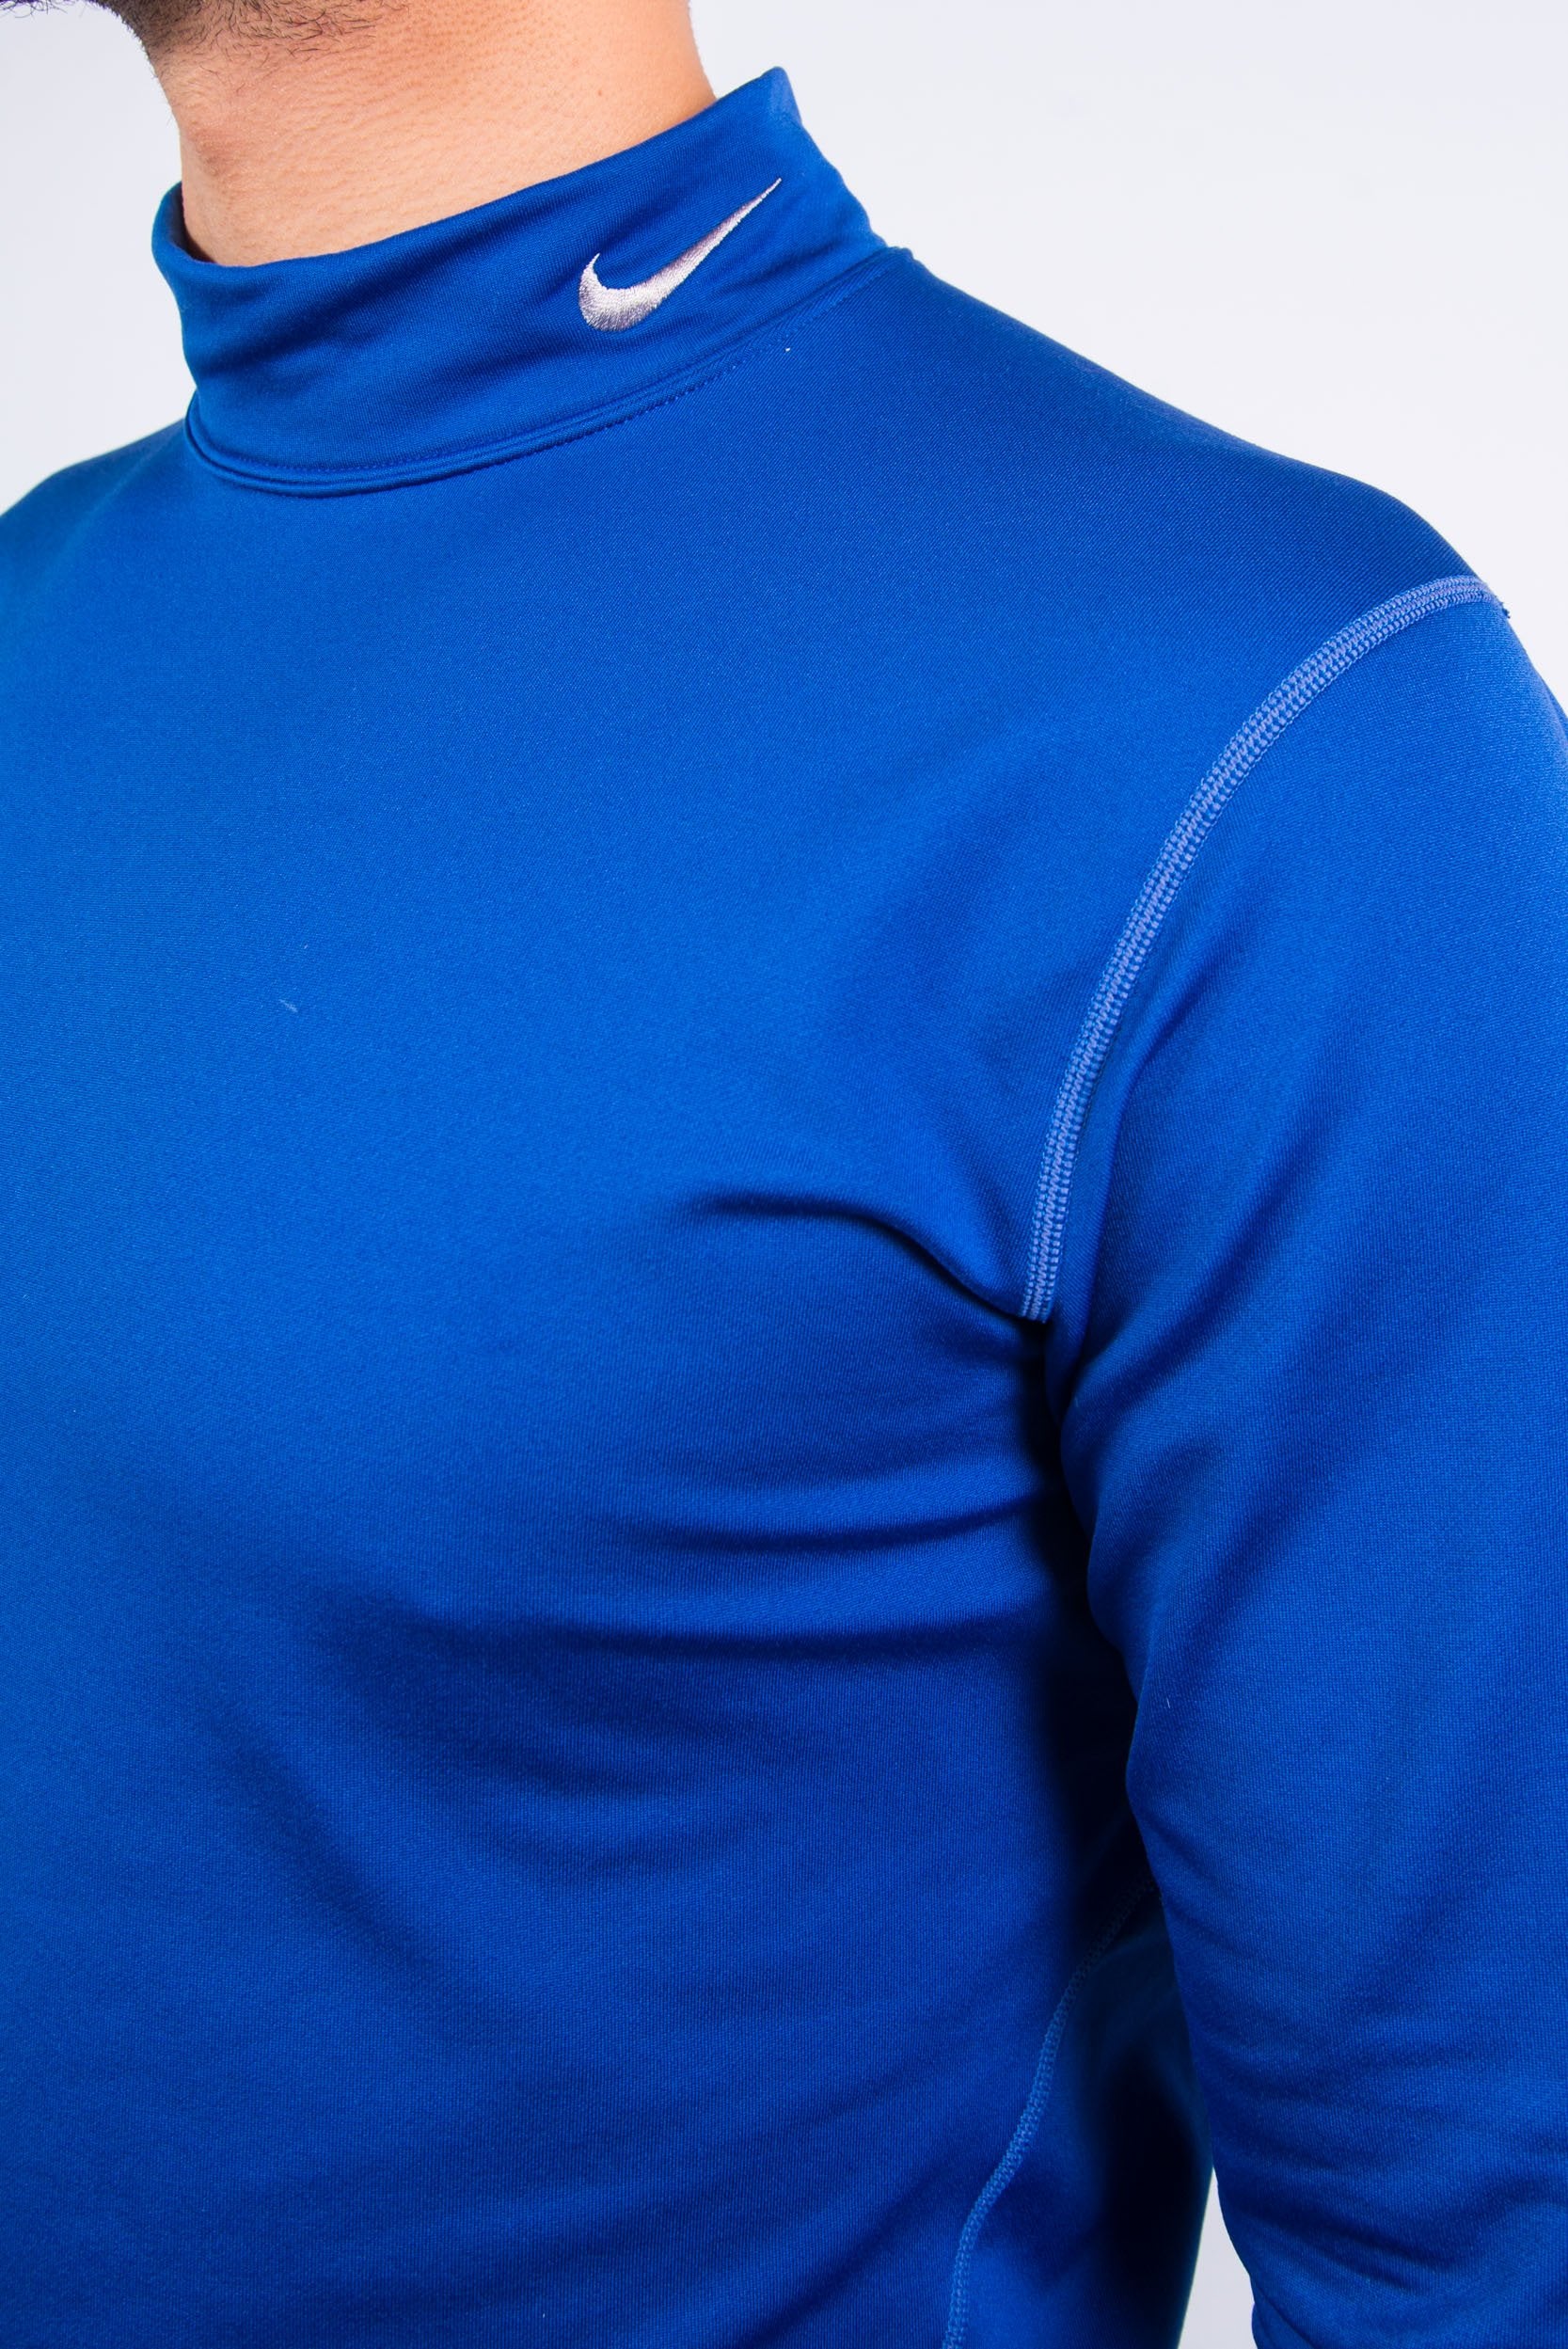 Nike High Neck Thermal Top – The Vintage Scene